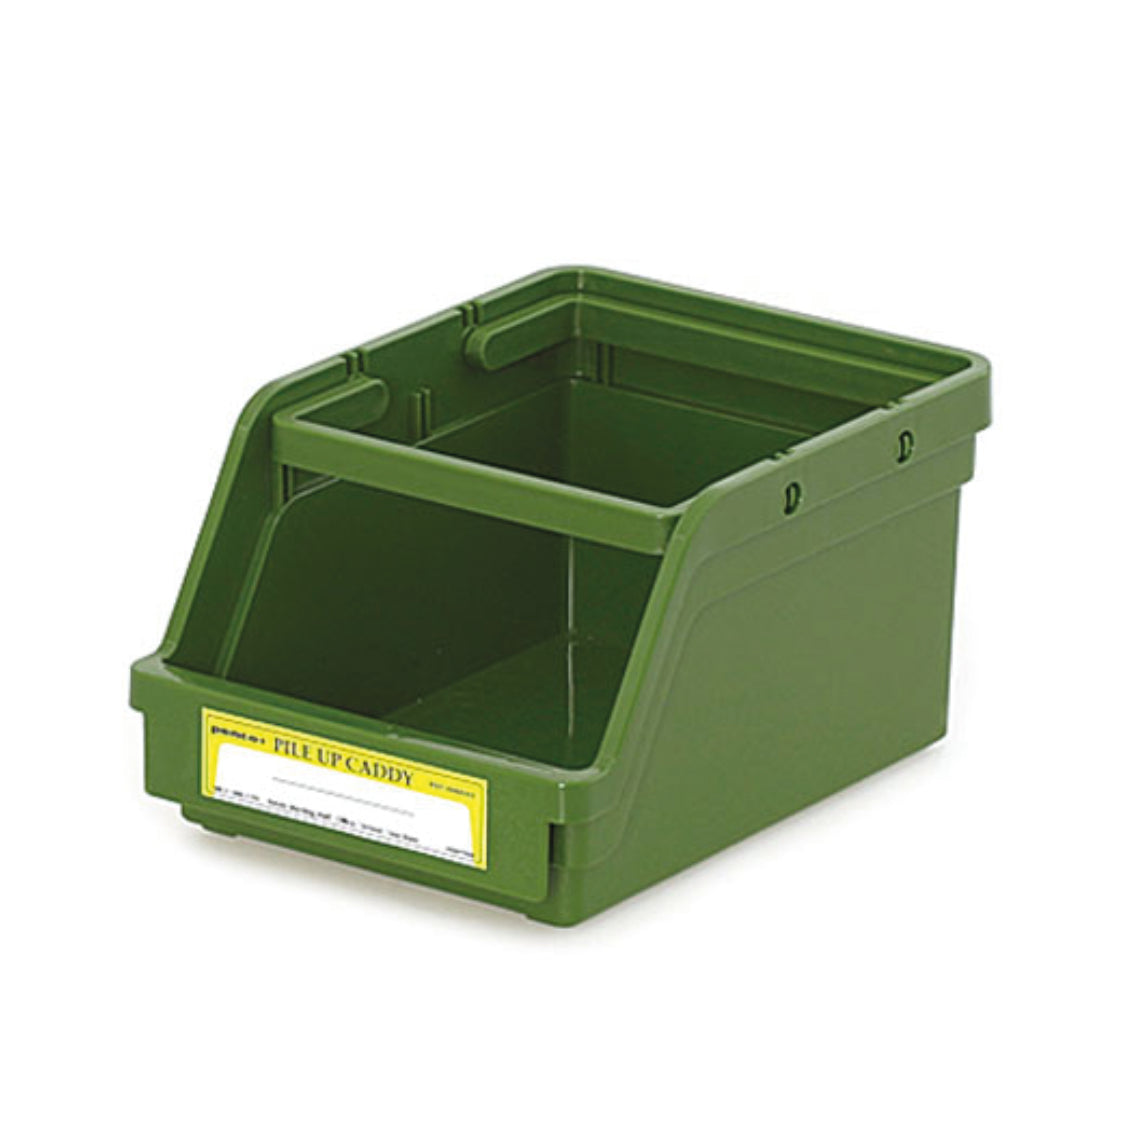 Penco Pile Up Caddy - Green